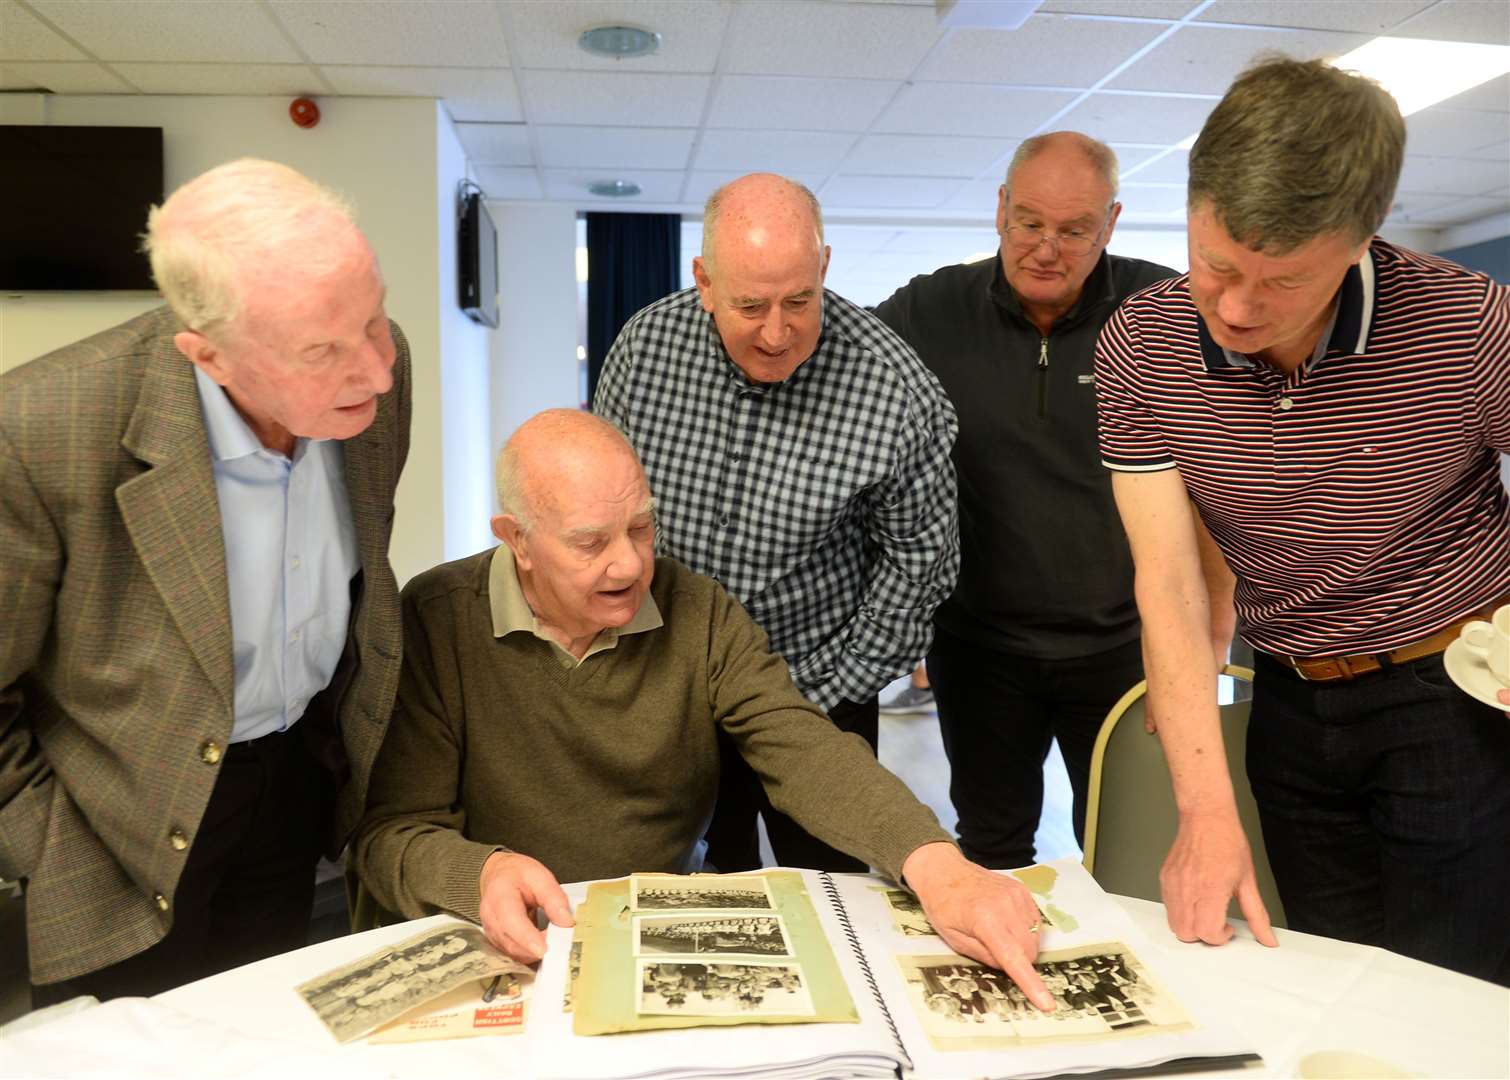 Former Thistle and Caley player Alex Grant, former Caley, Clach and Forres keeper Ian MacDonald, Peter Corbett who played for Caley, Clach and Thistle, Ewan MacDonald of Dingwall Thistle and Thistle legend David Milroy browse Ian's football memories book.